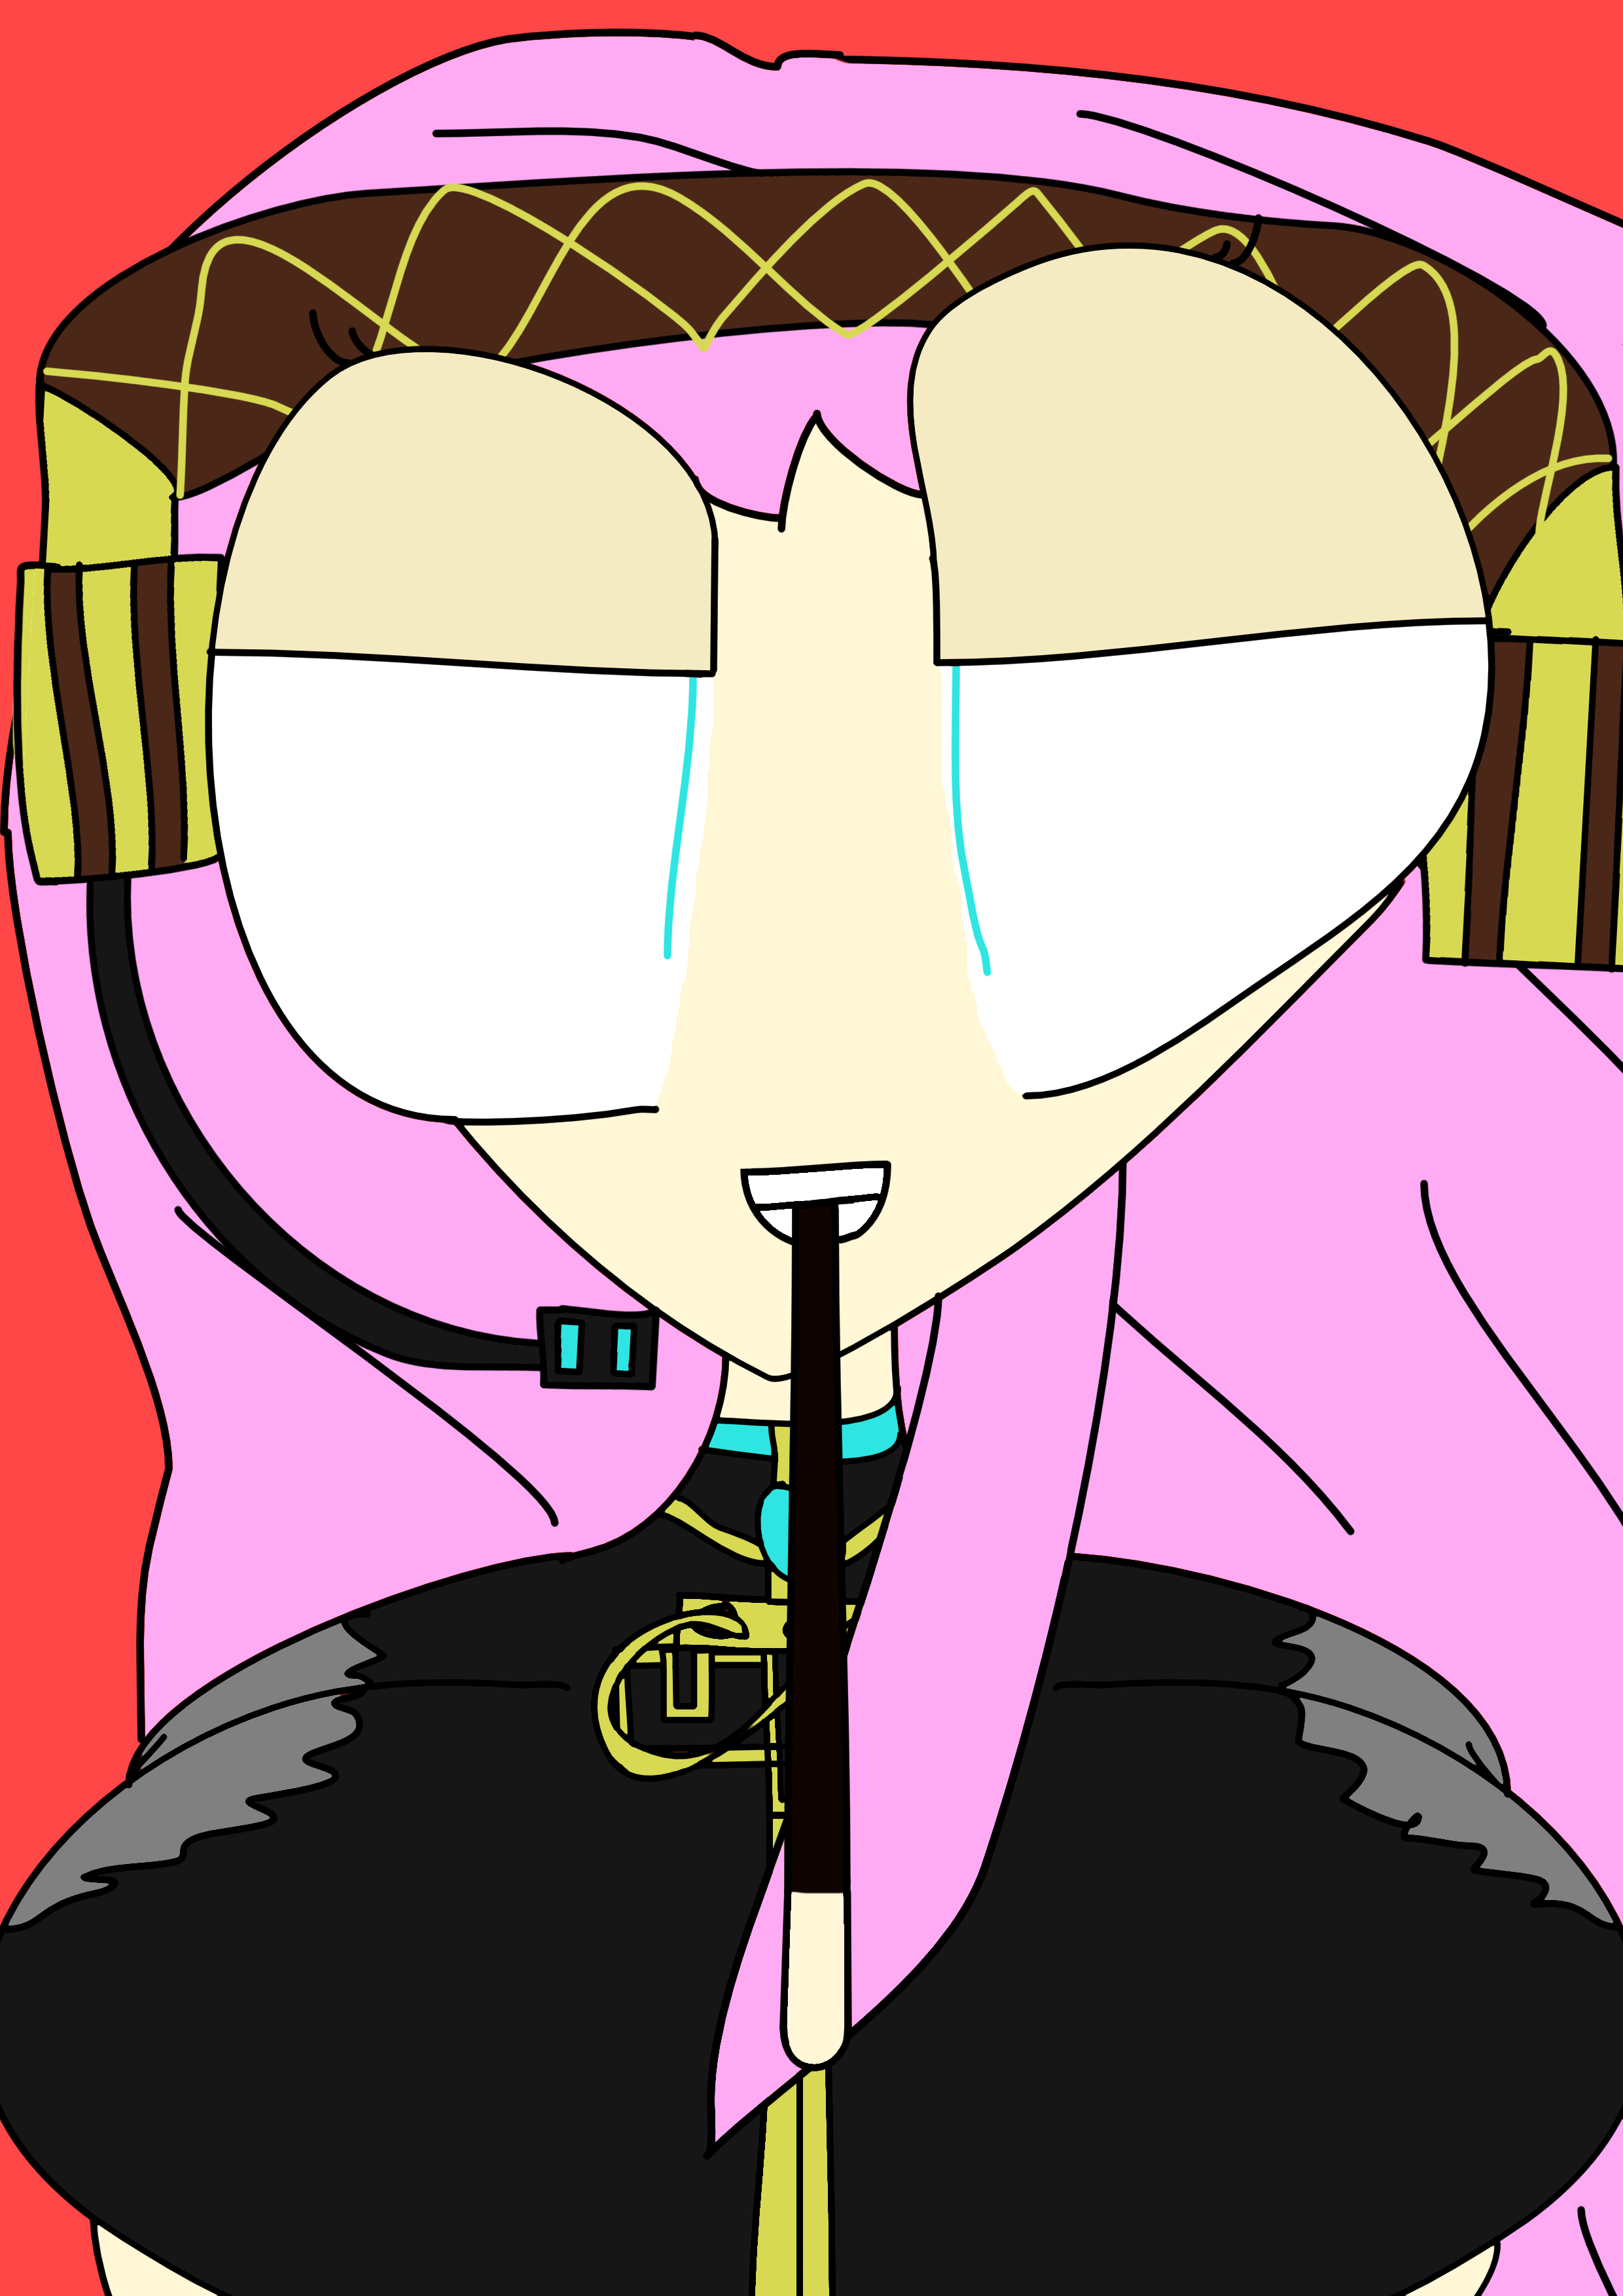 A portrait drawing of Luka Megurine, smiling and holding a Pocky stick with her mouth.